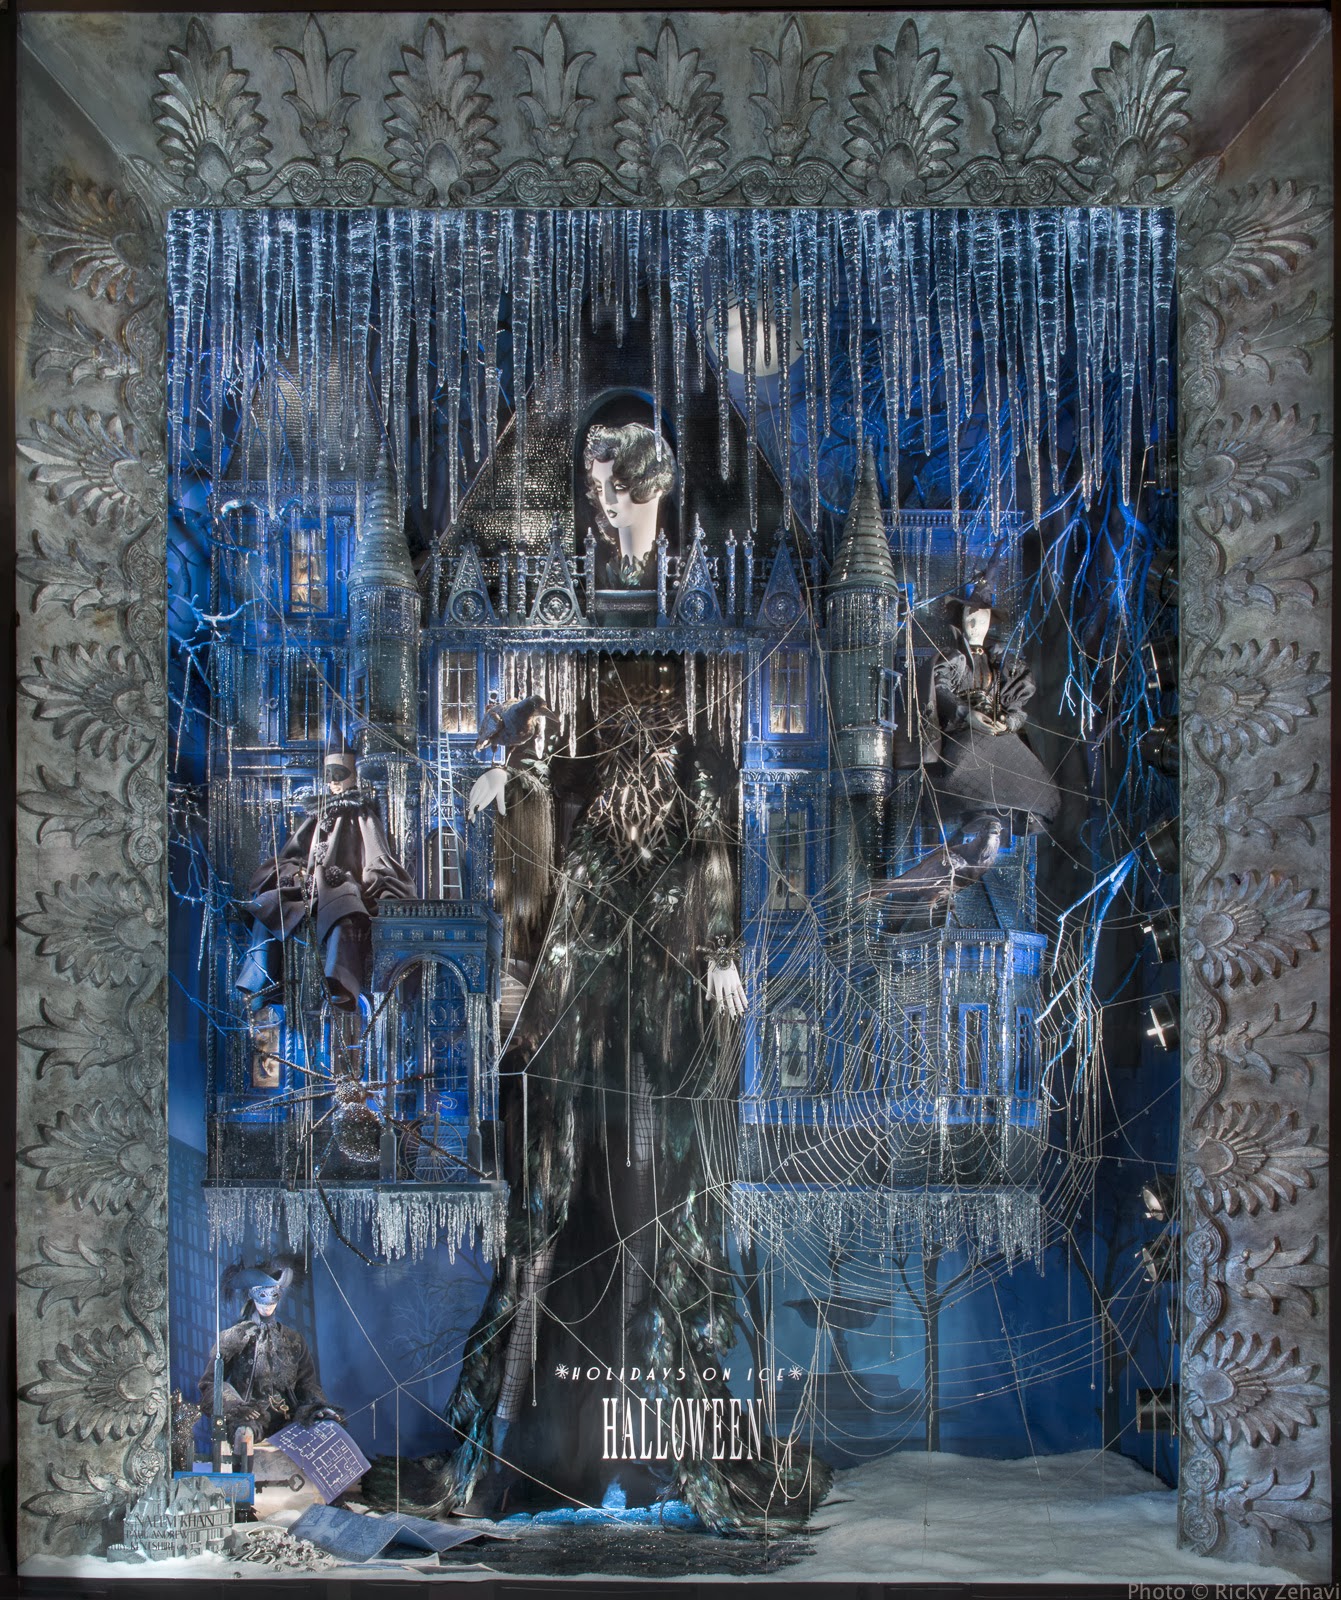 Eye Candy: Bergdorf Goodman's Holiday Windows and the Enduring Art